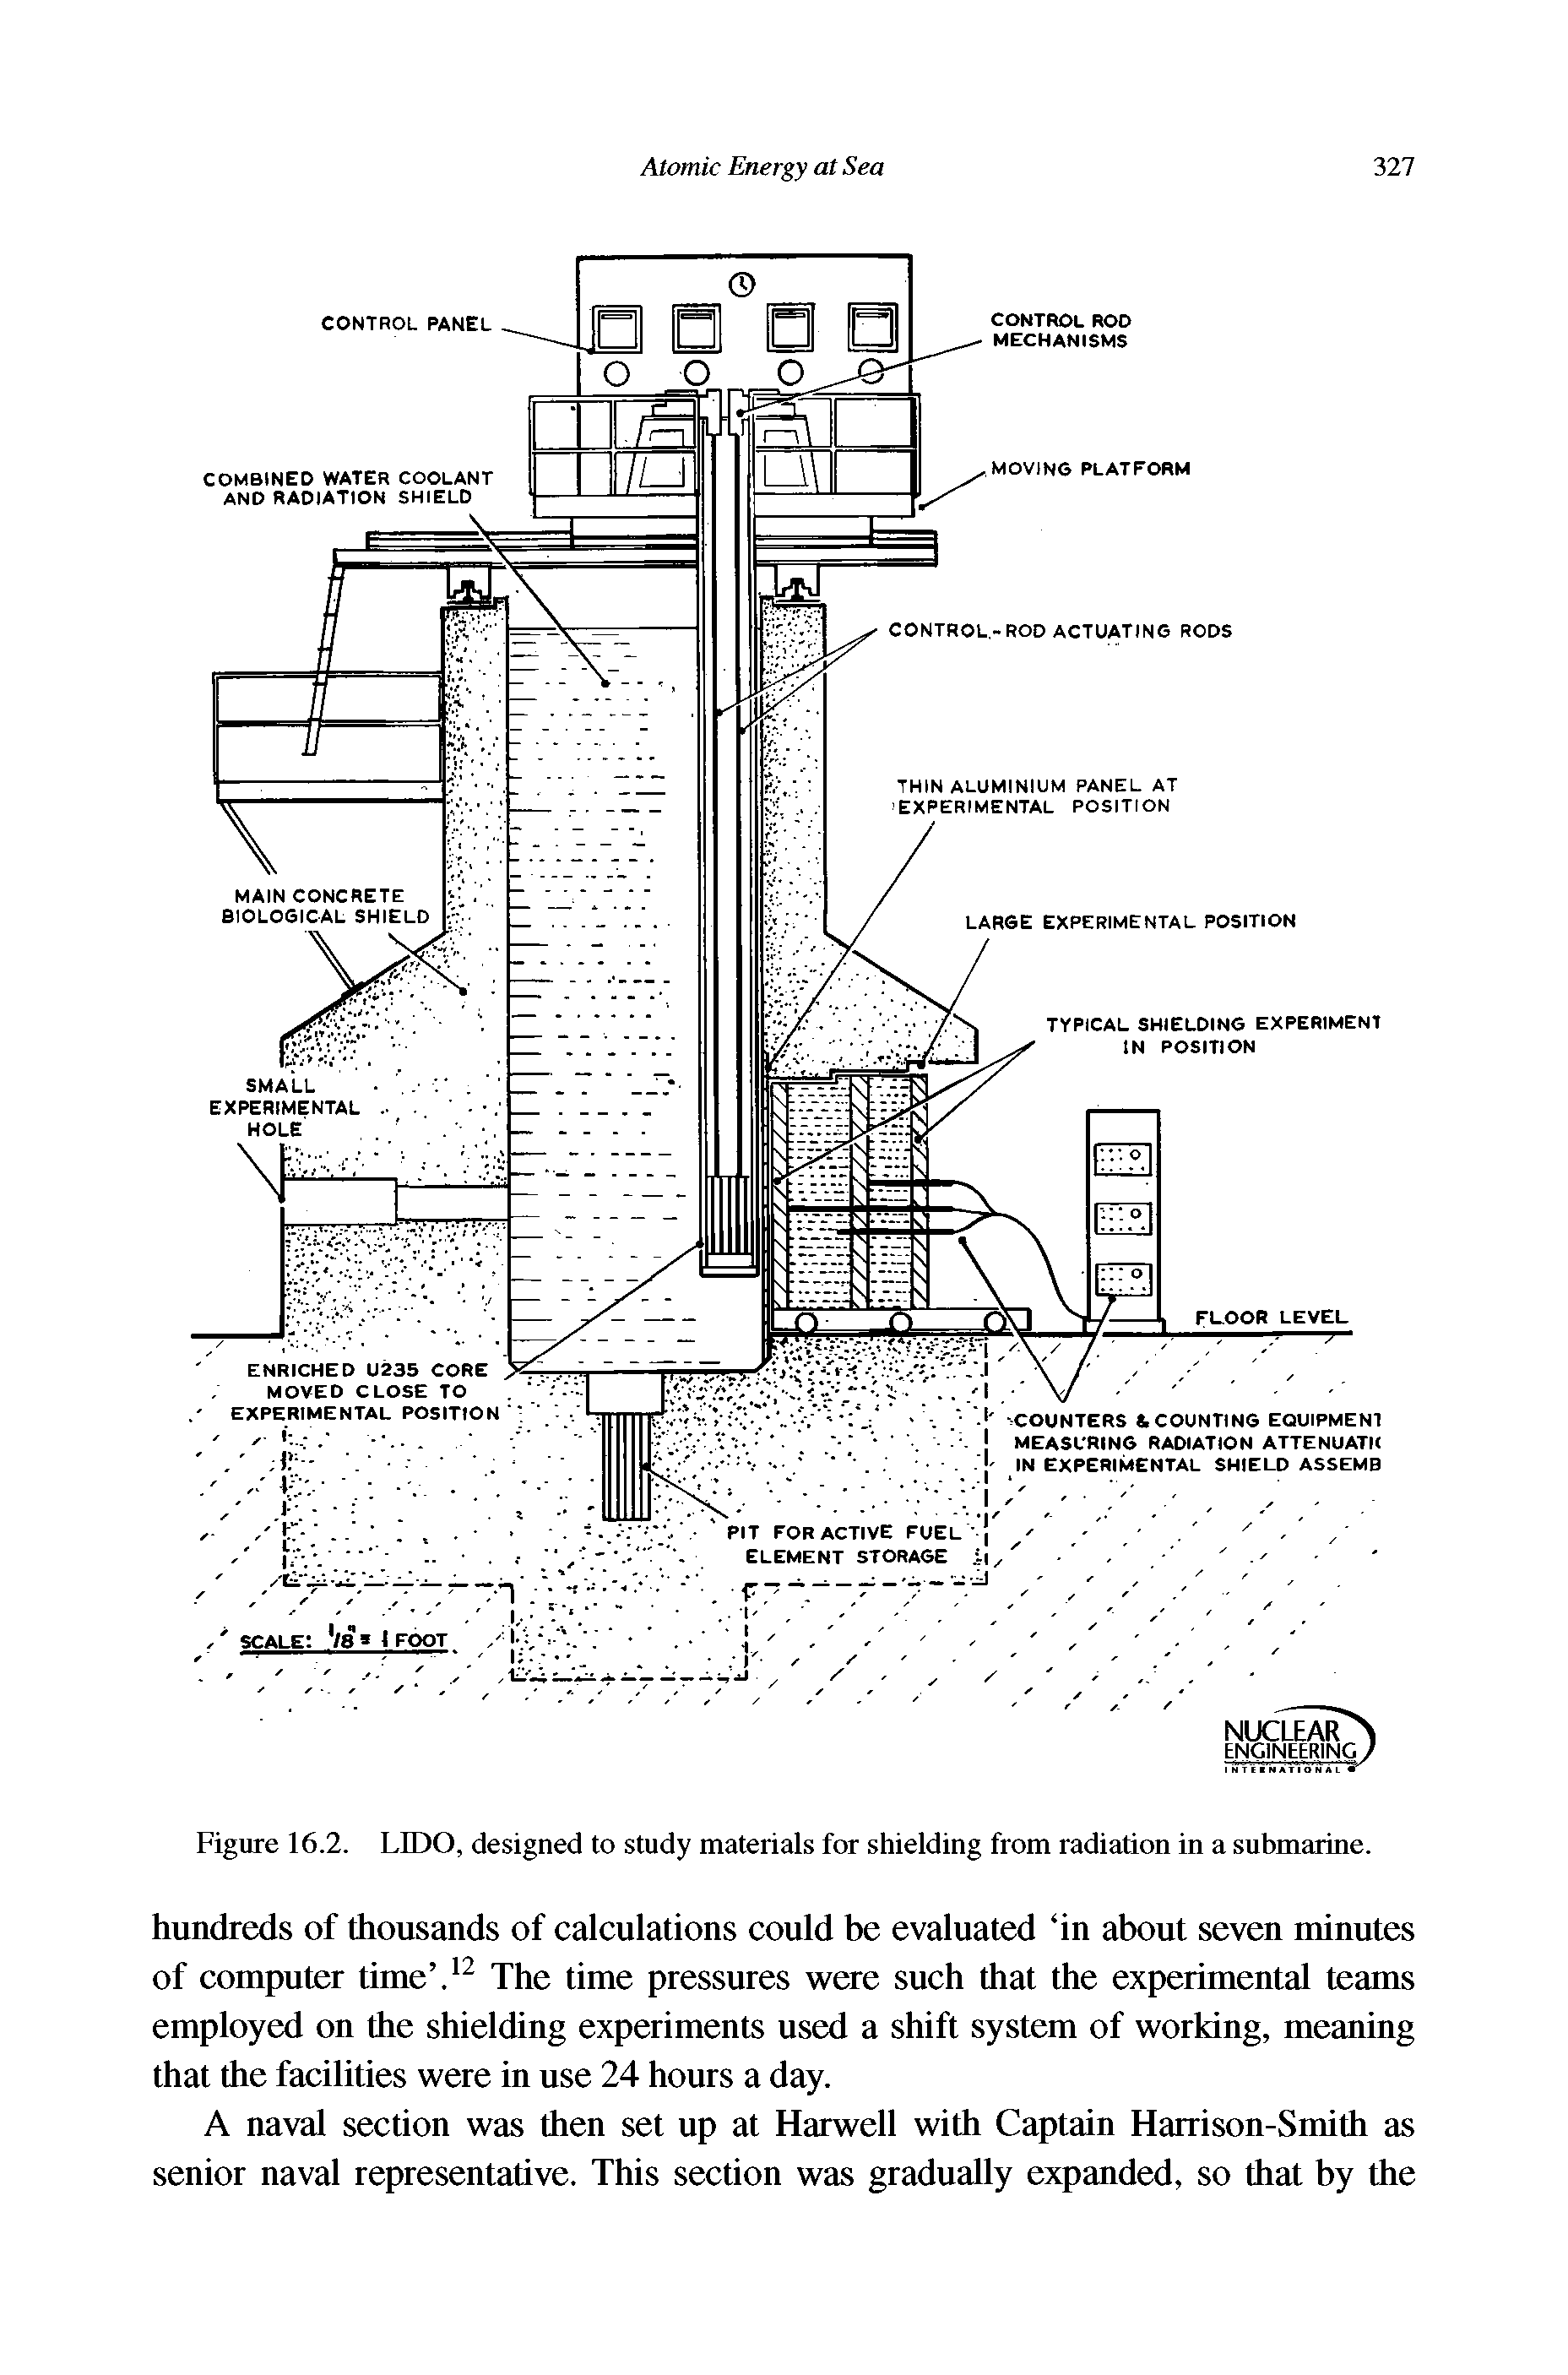 Figure 16.2. LIDO, designed to study materials for shielding from radiation in a submarine.